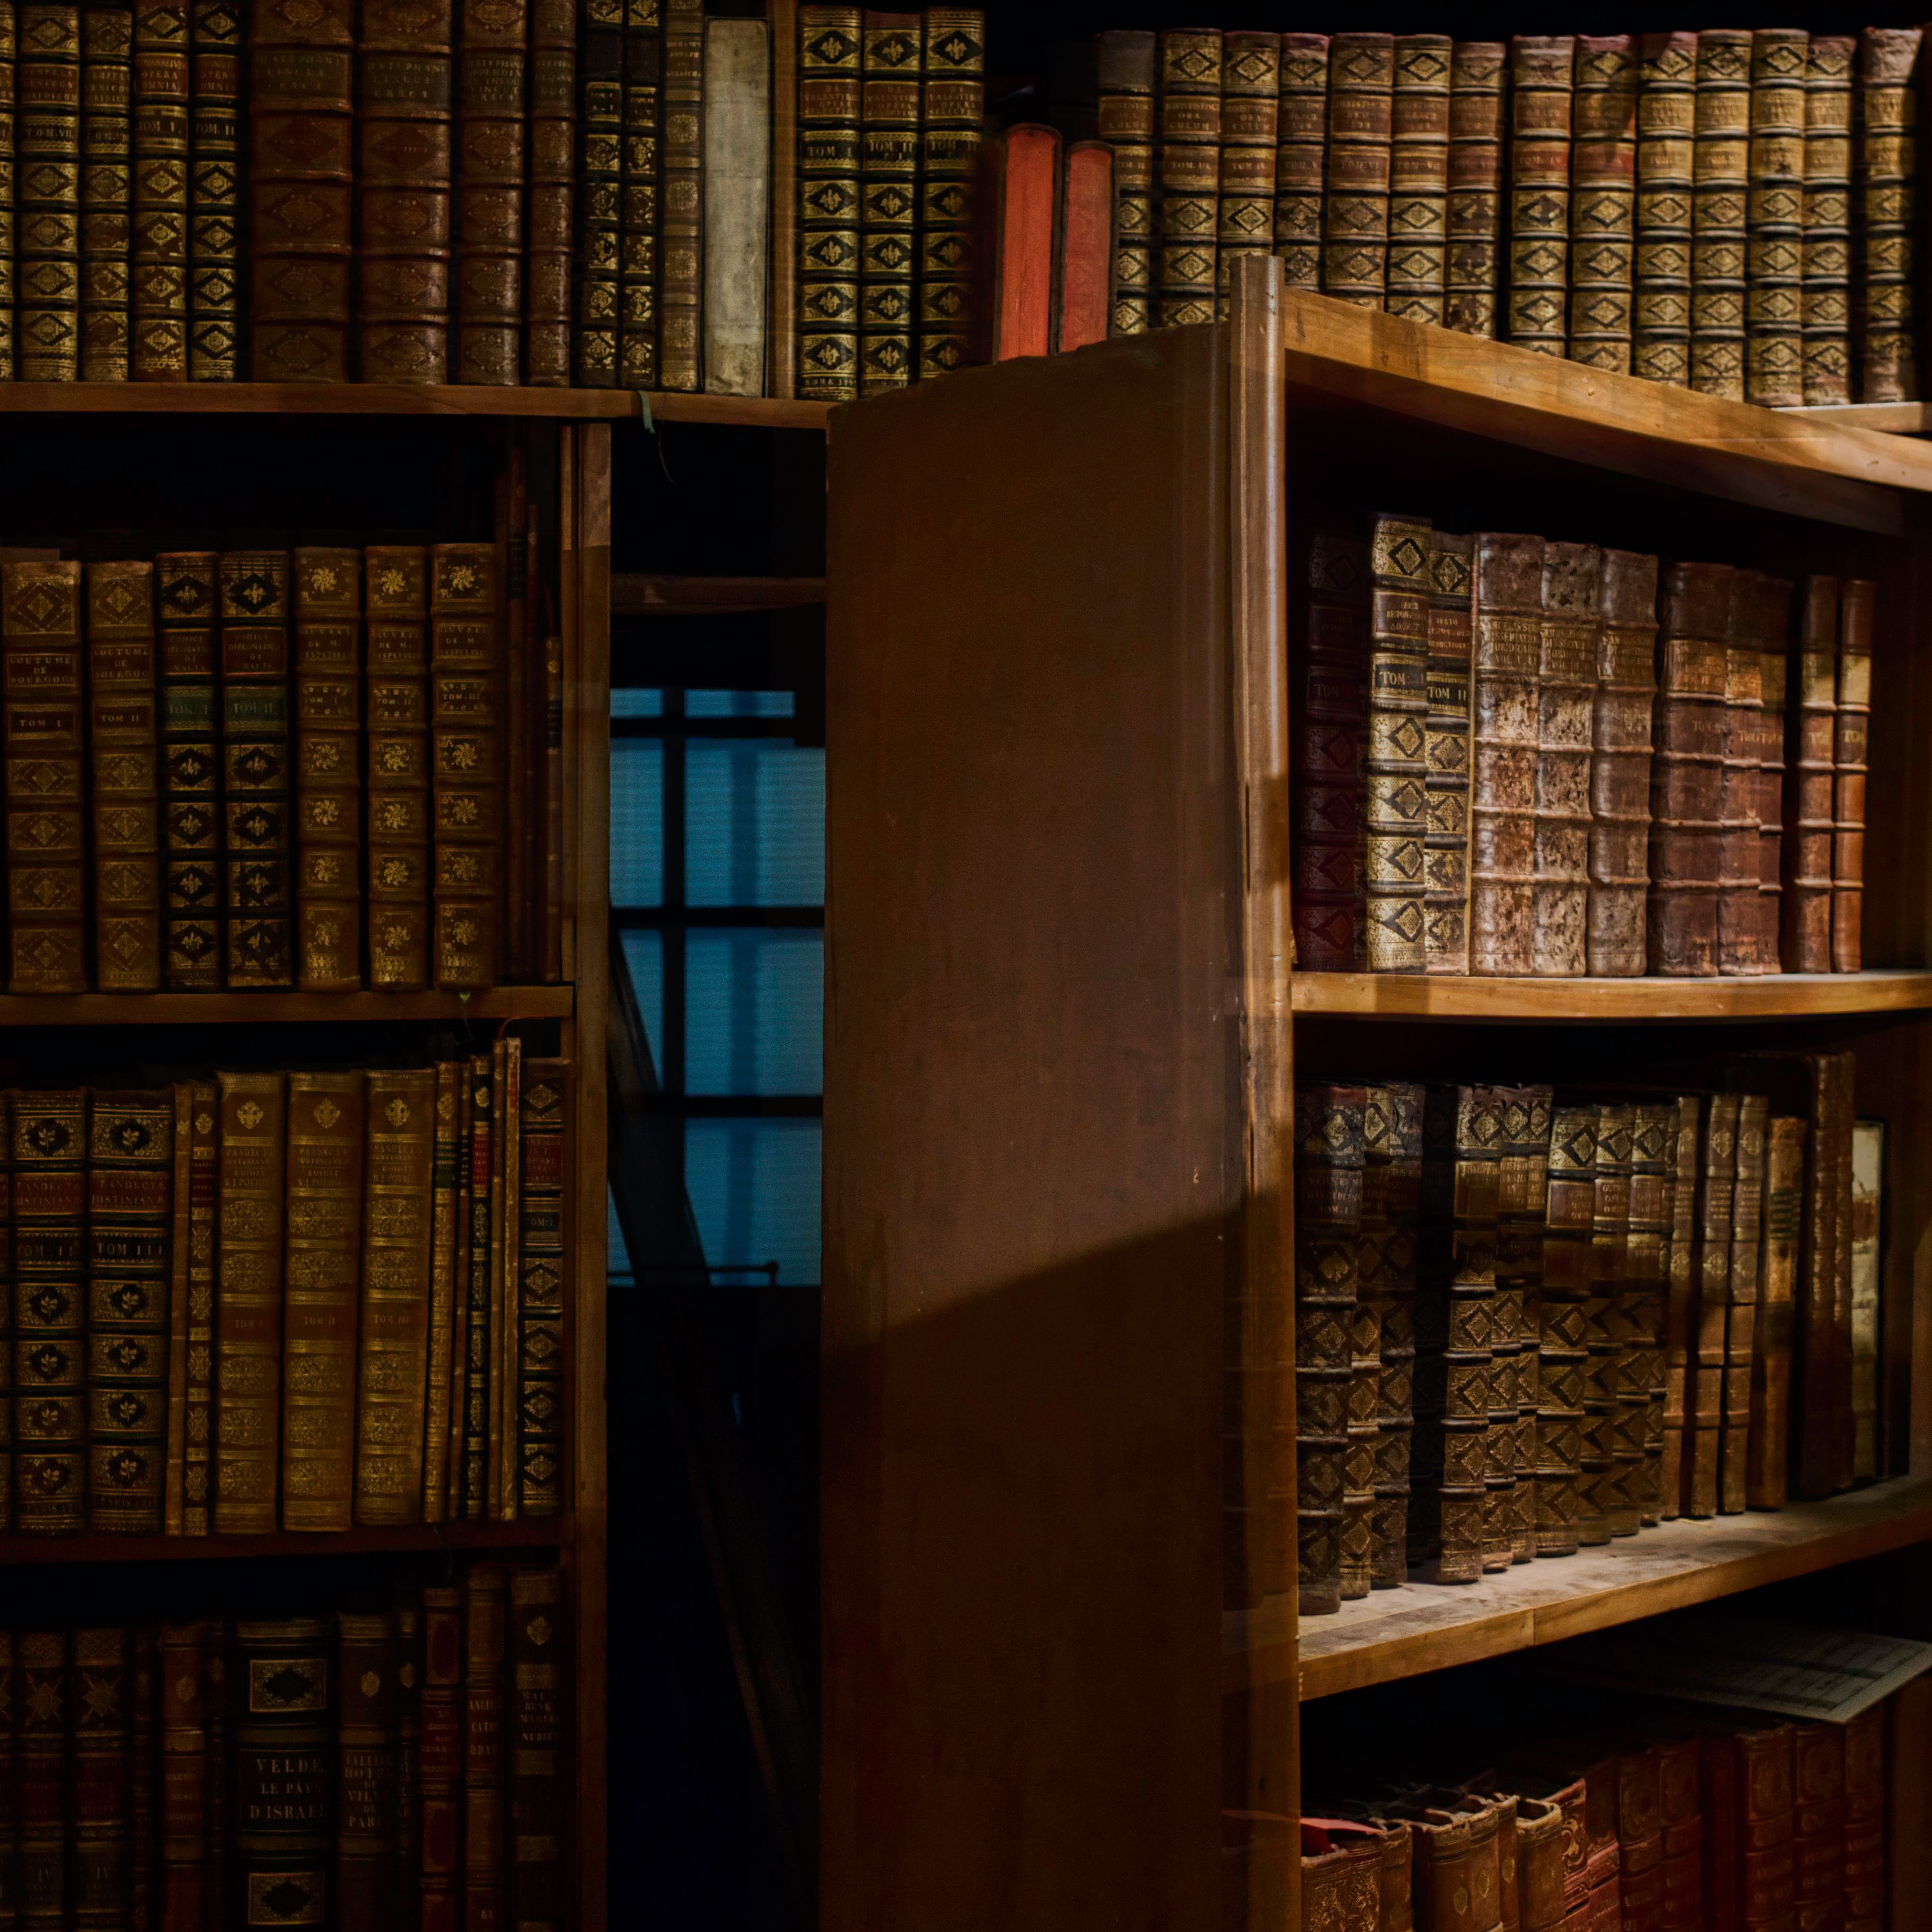 An image of a secret passage opening behind a bookcase. Credit to Stefan Steinbauer on Unsplash.